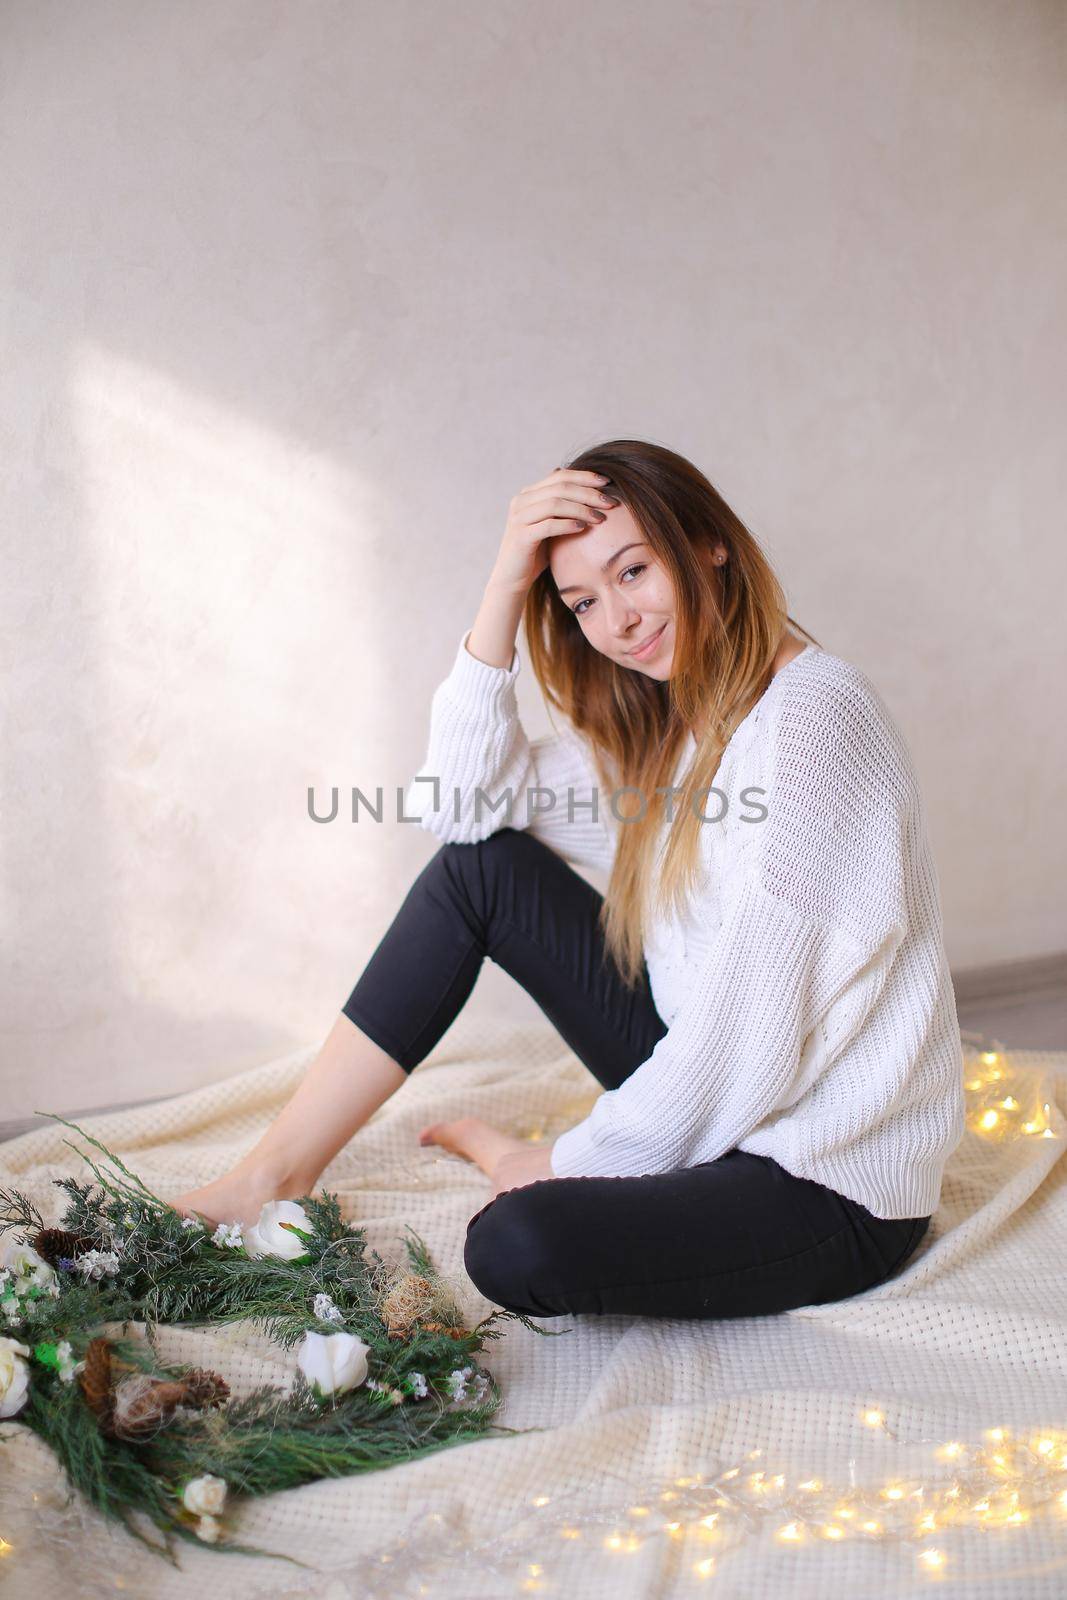 Young female person sitting on bed near wreath and yellow garlands. Concept of handmade decorations for Christmas and winter holidays.